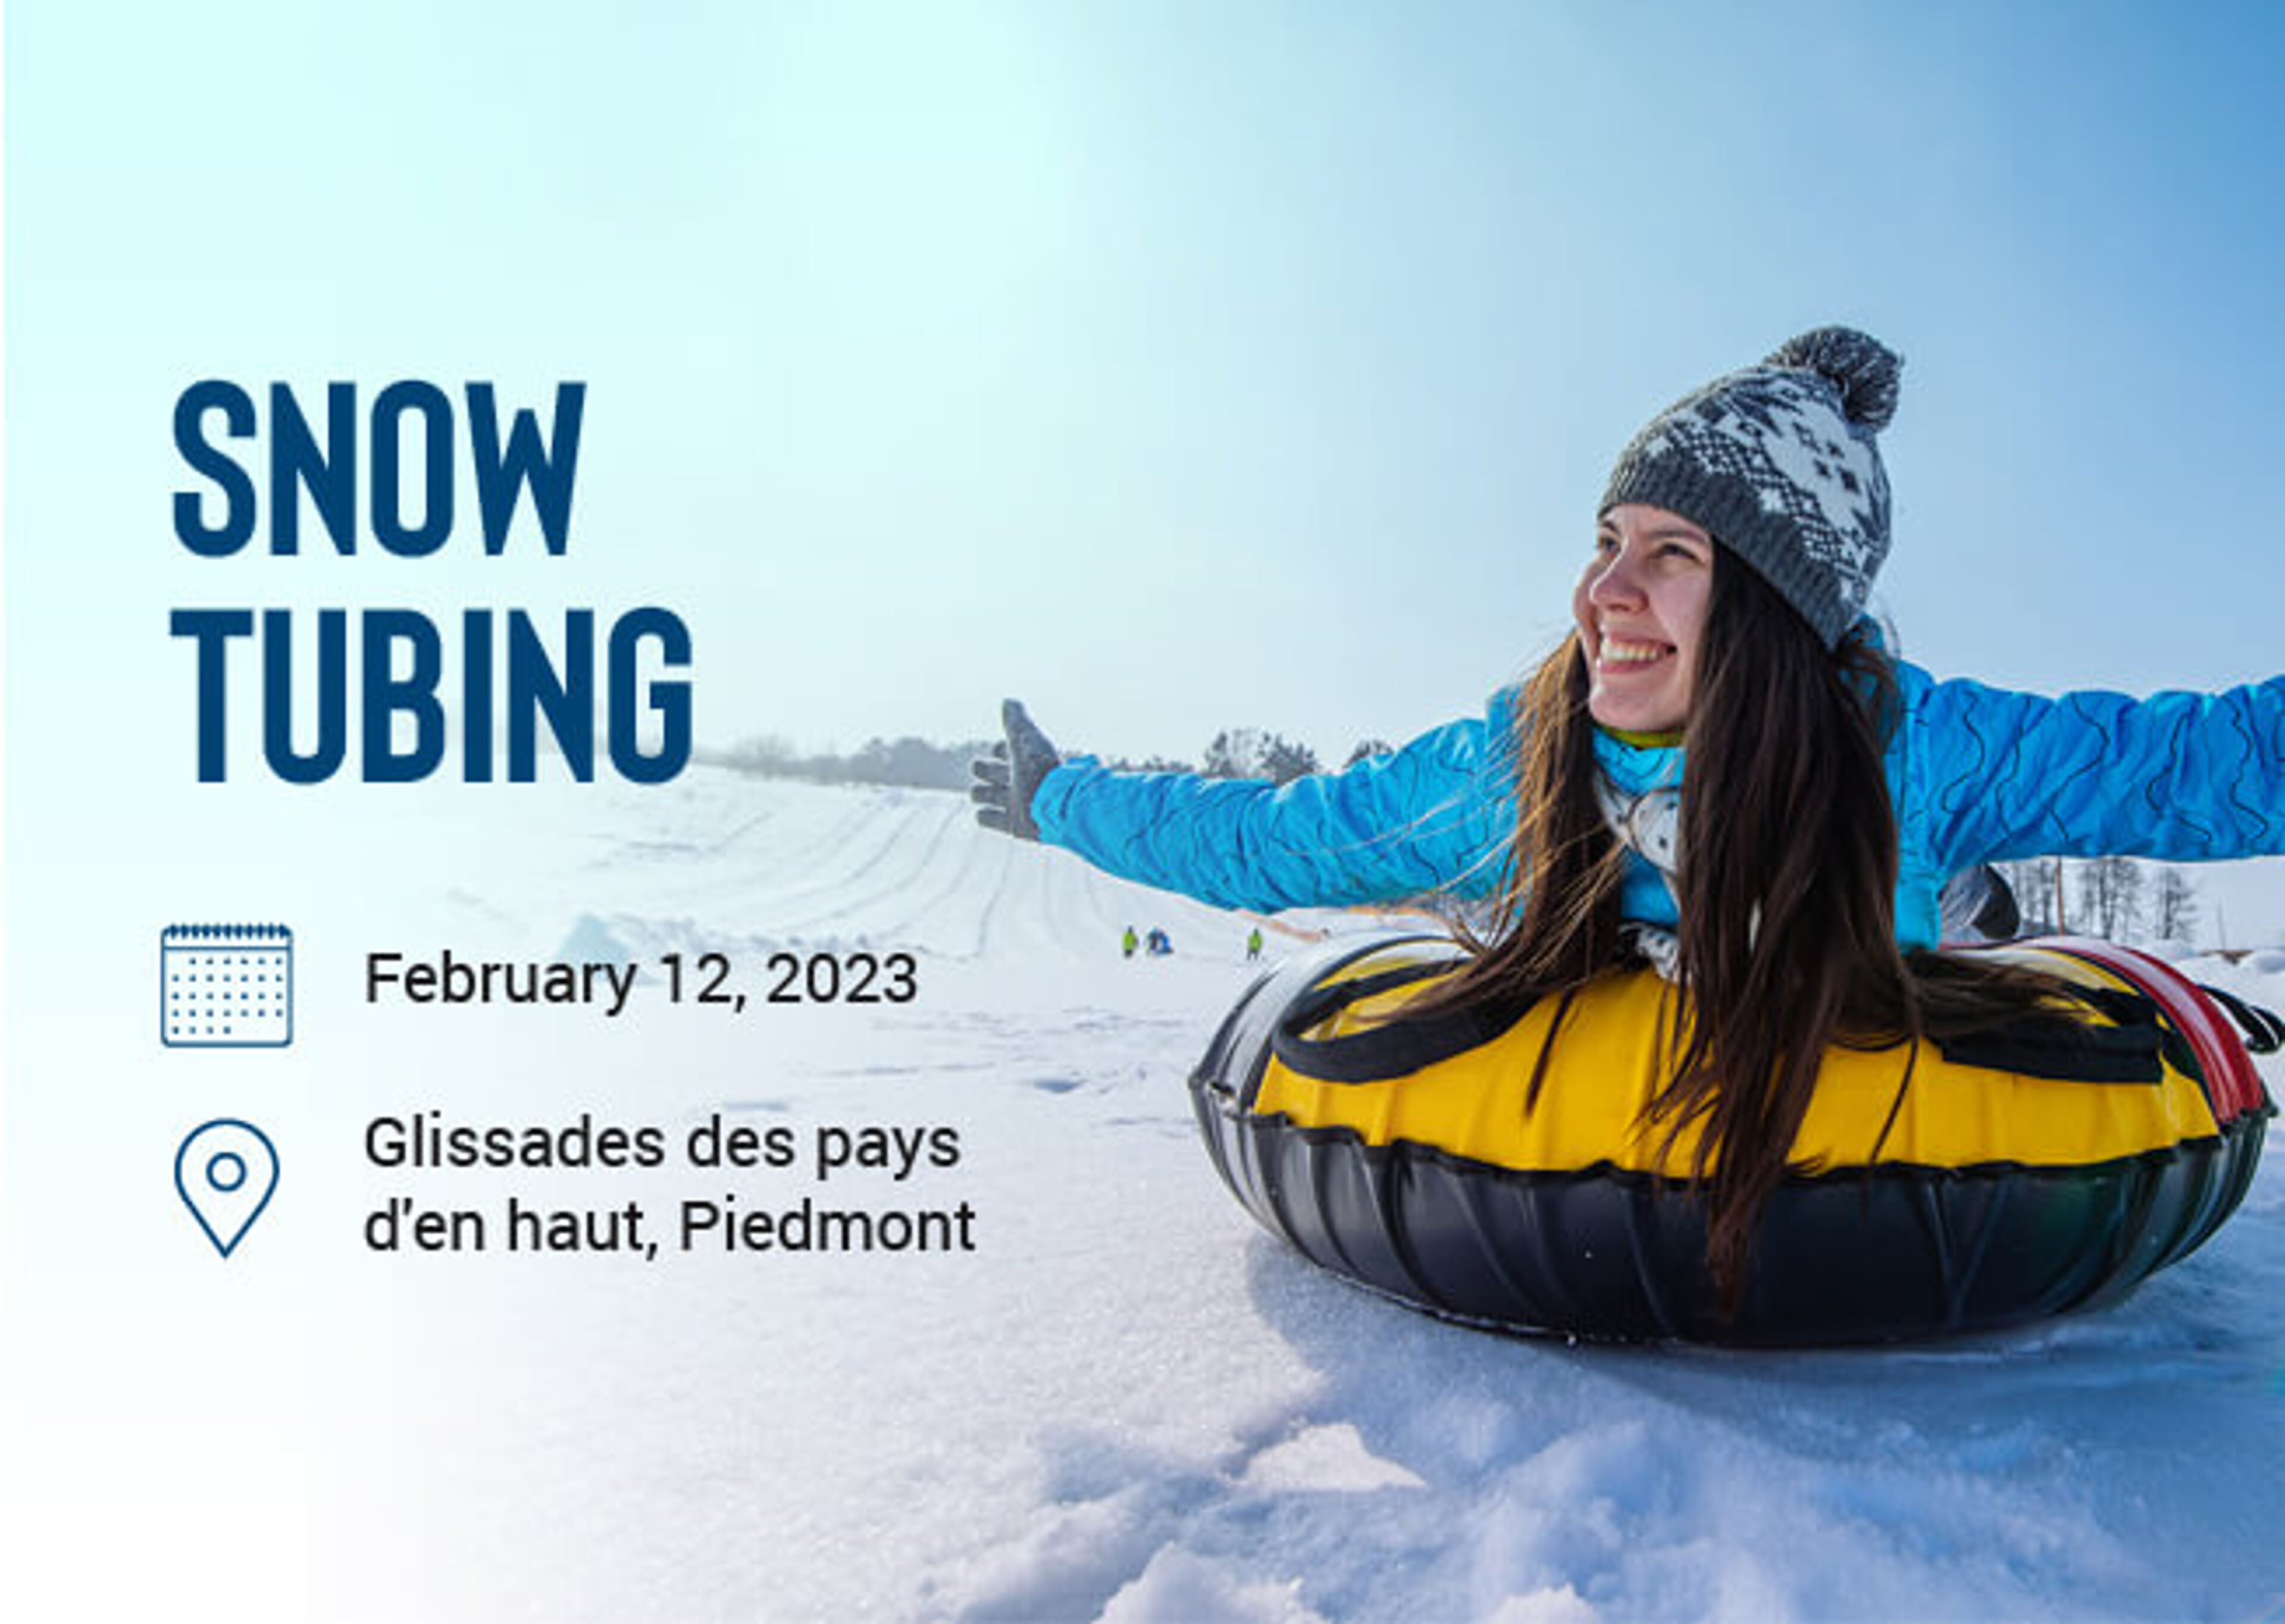 Promotional flyer for a snow tubing event on February 12 at Glissades des pays d'en haut, Piedmont, featuring a joyful woman tubing.

